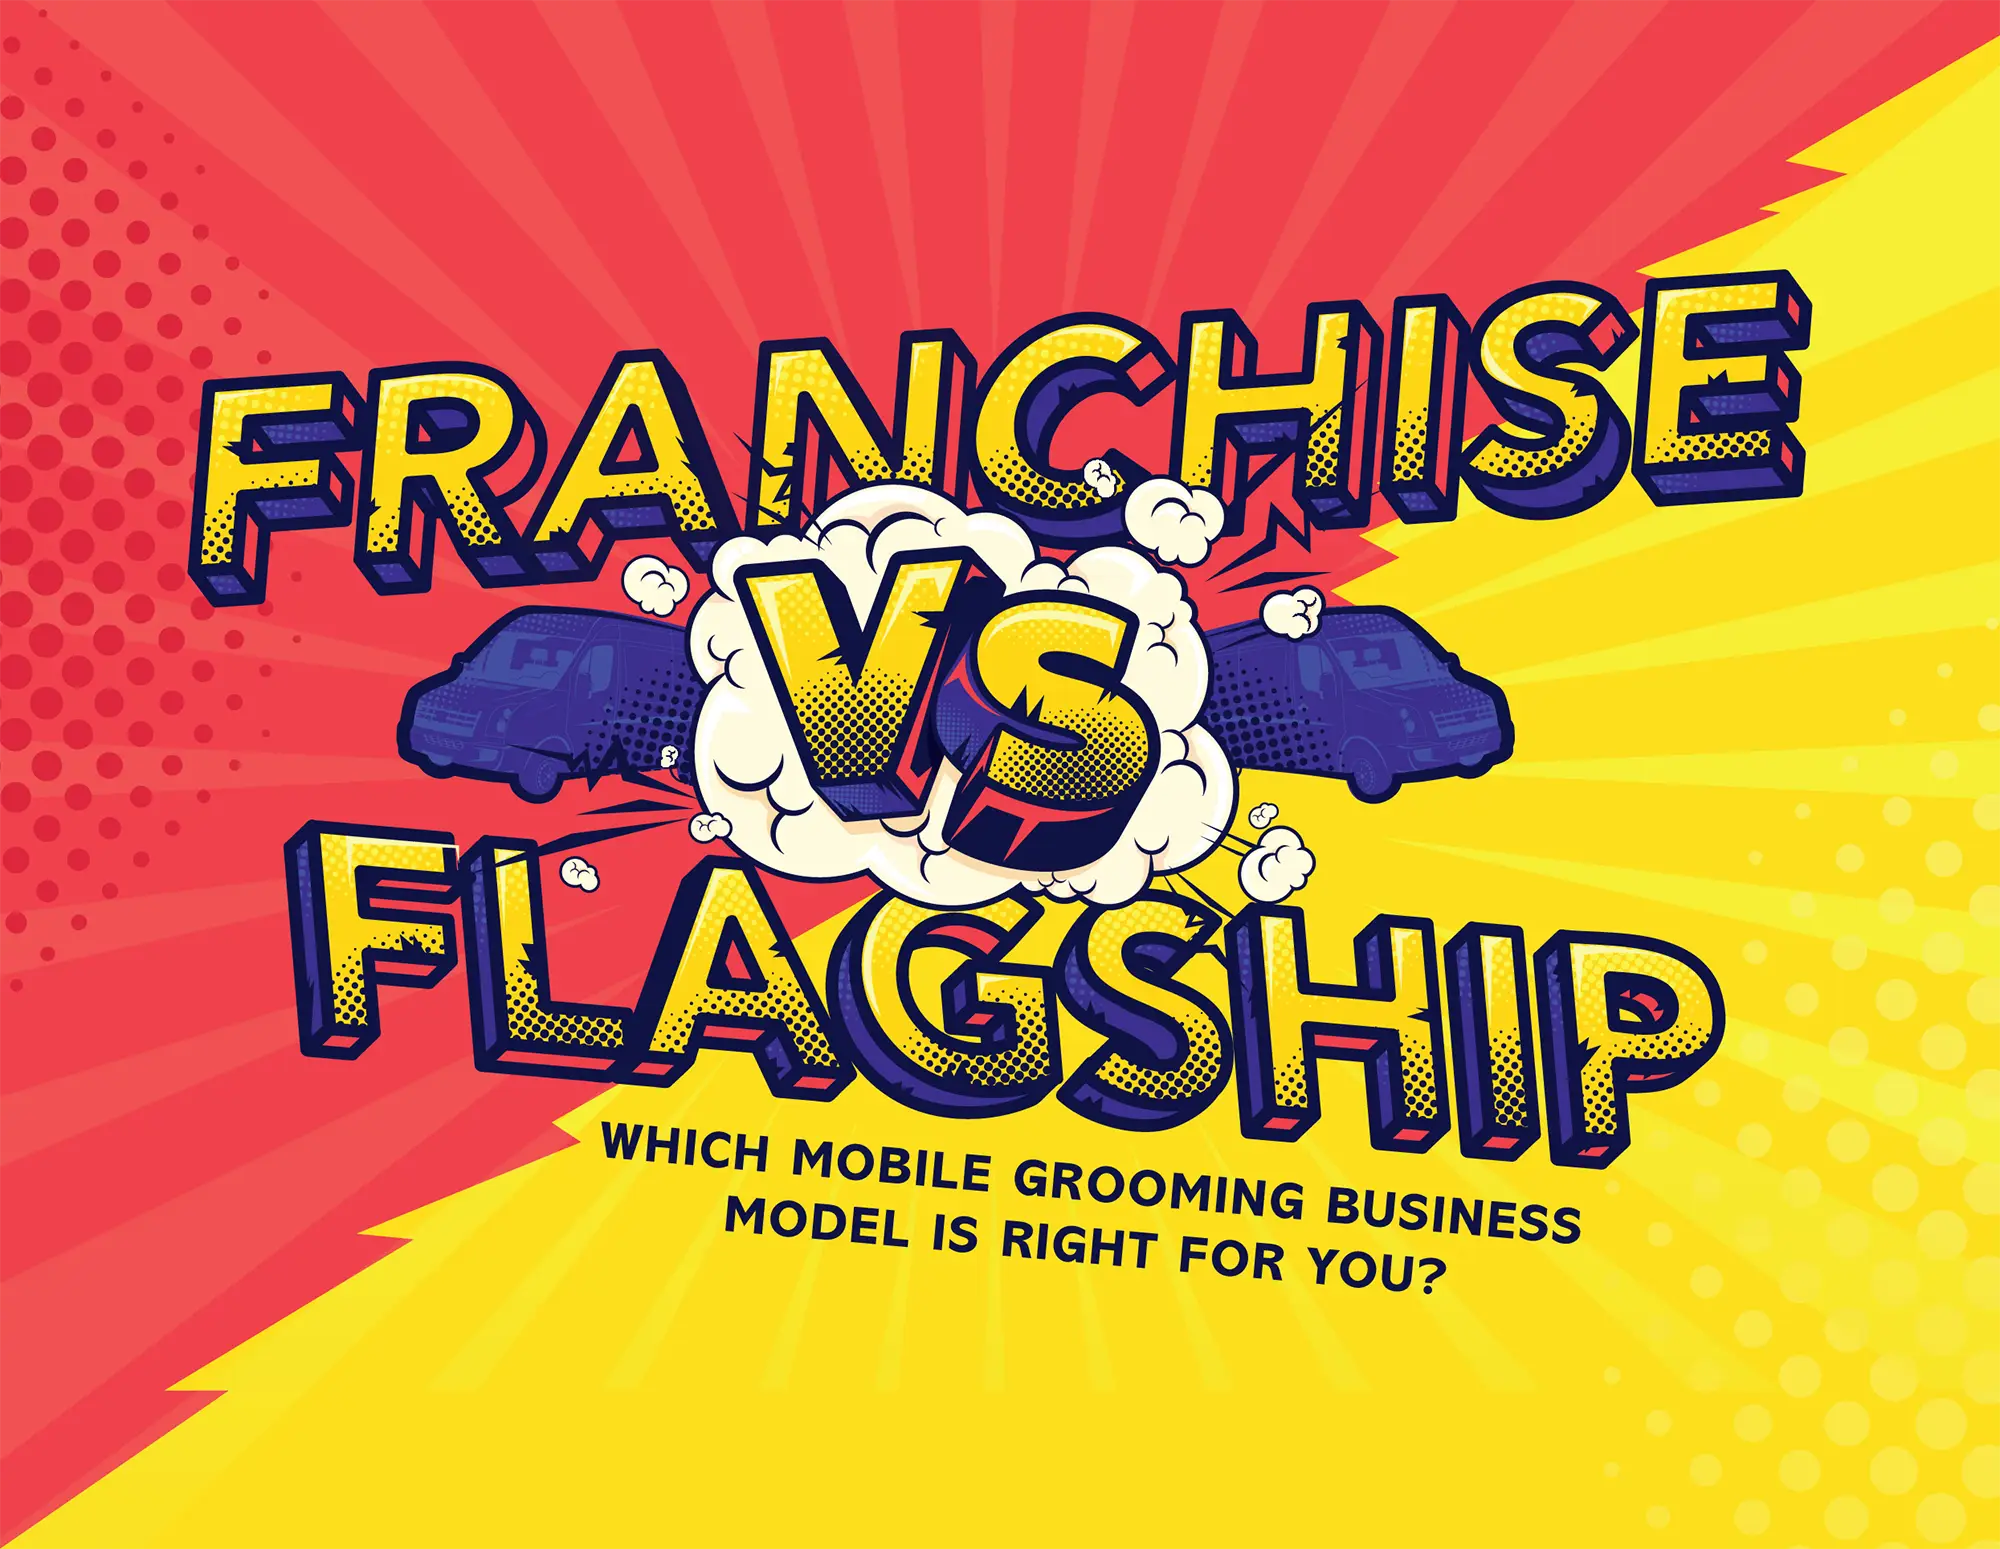 Franchise Vs Flagship: Which Mobile Grooming Business Model is Right for You? typographic illustration